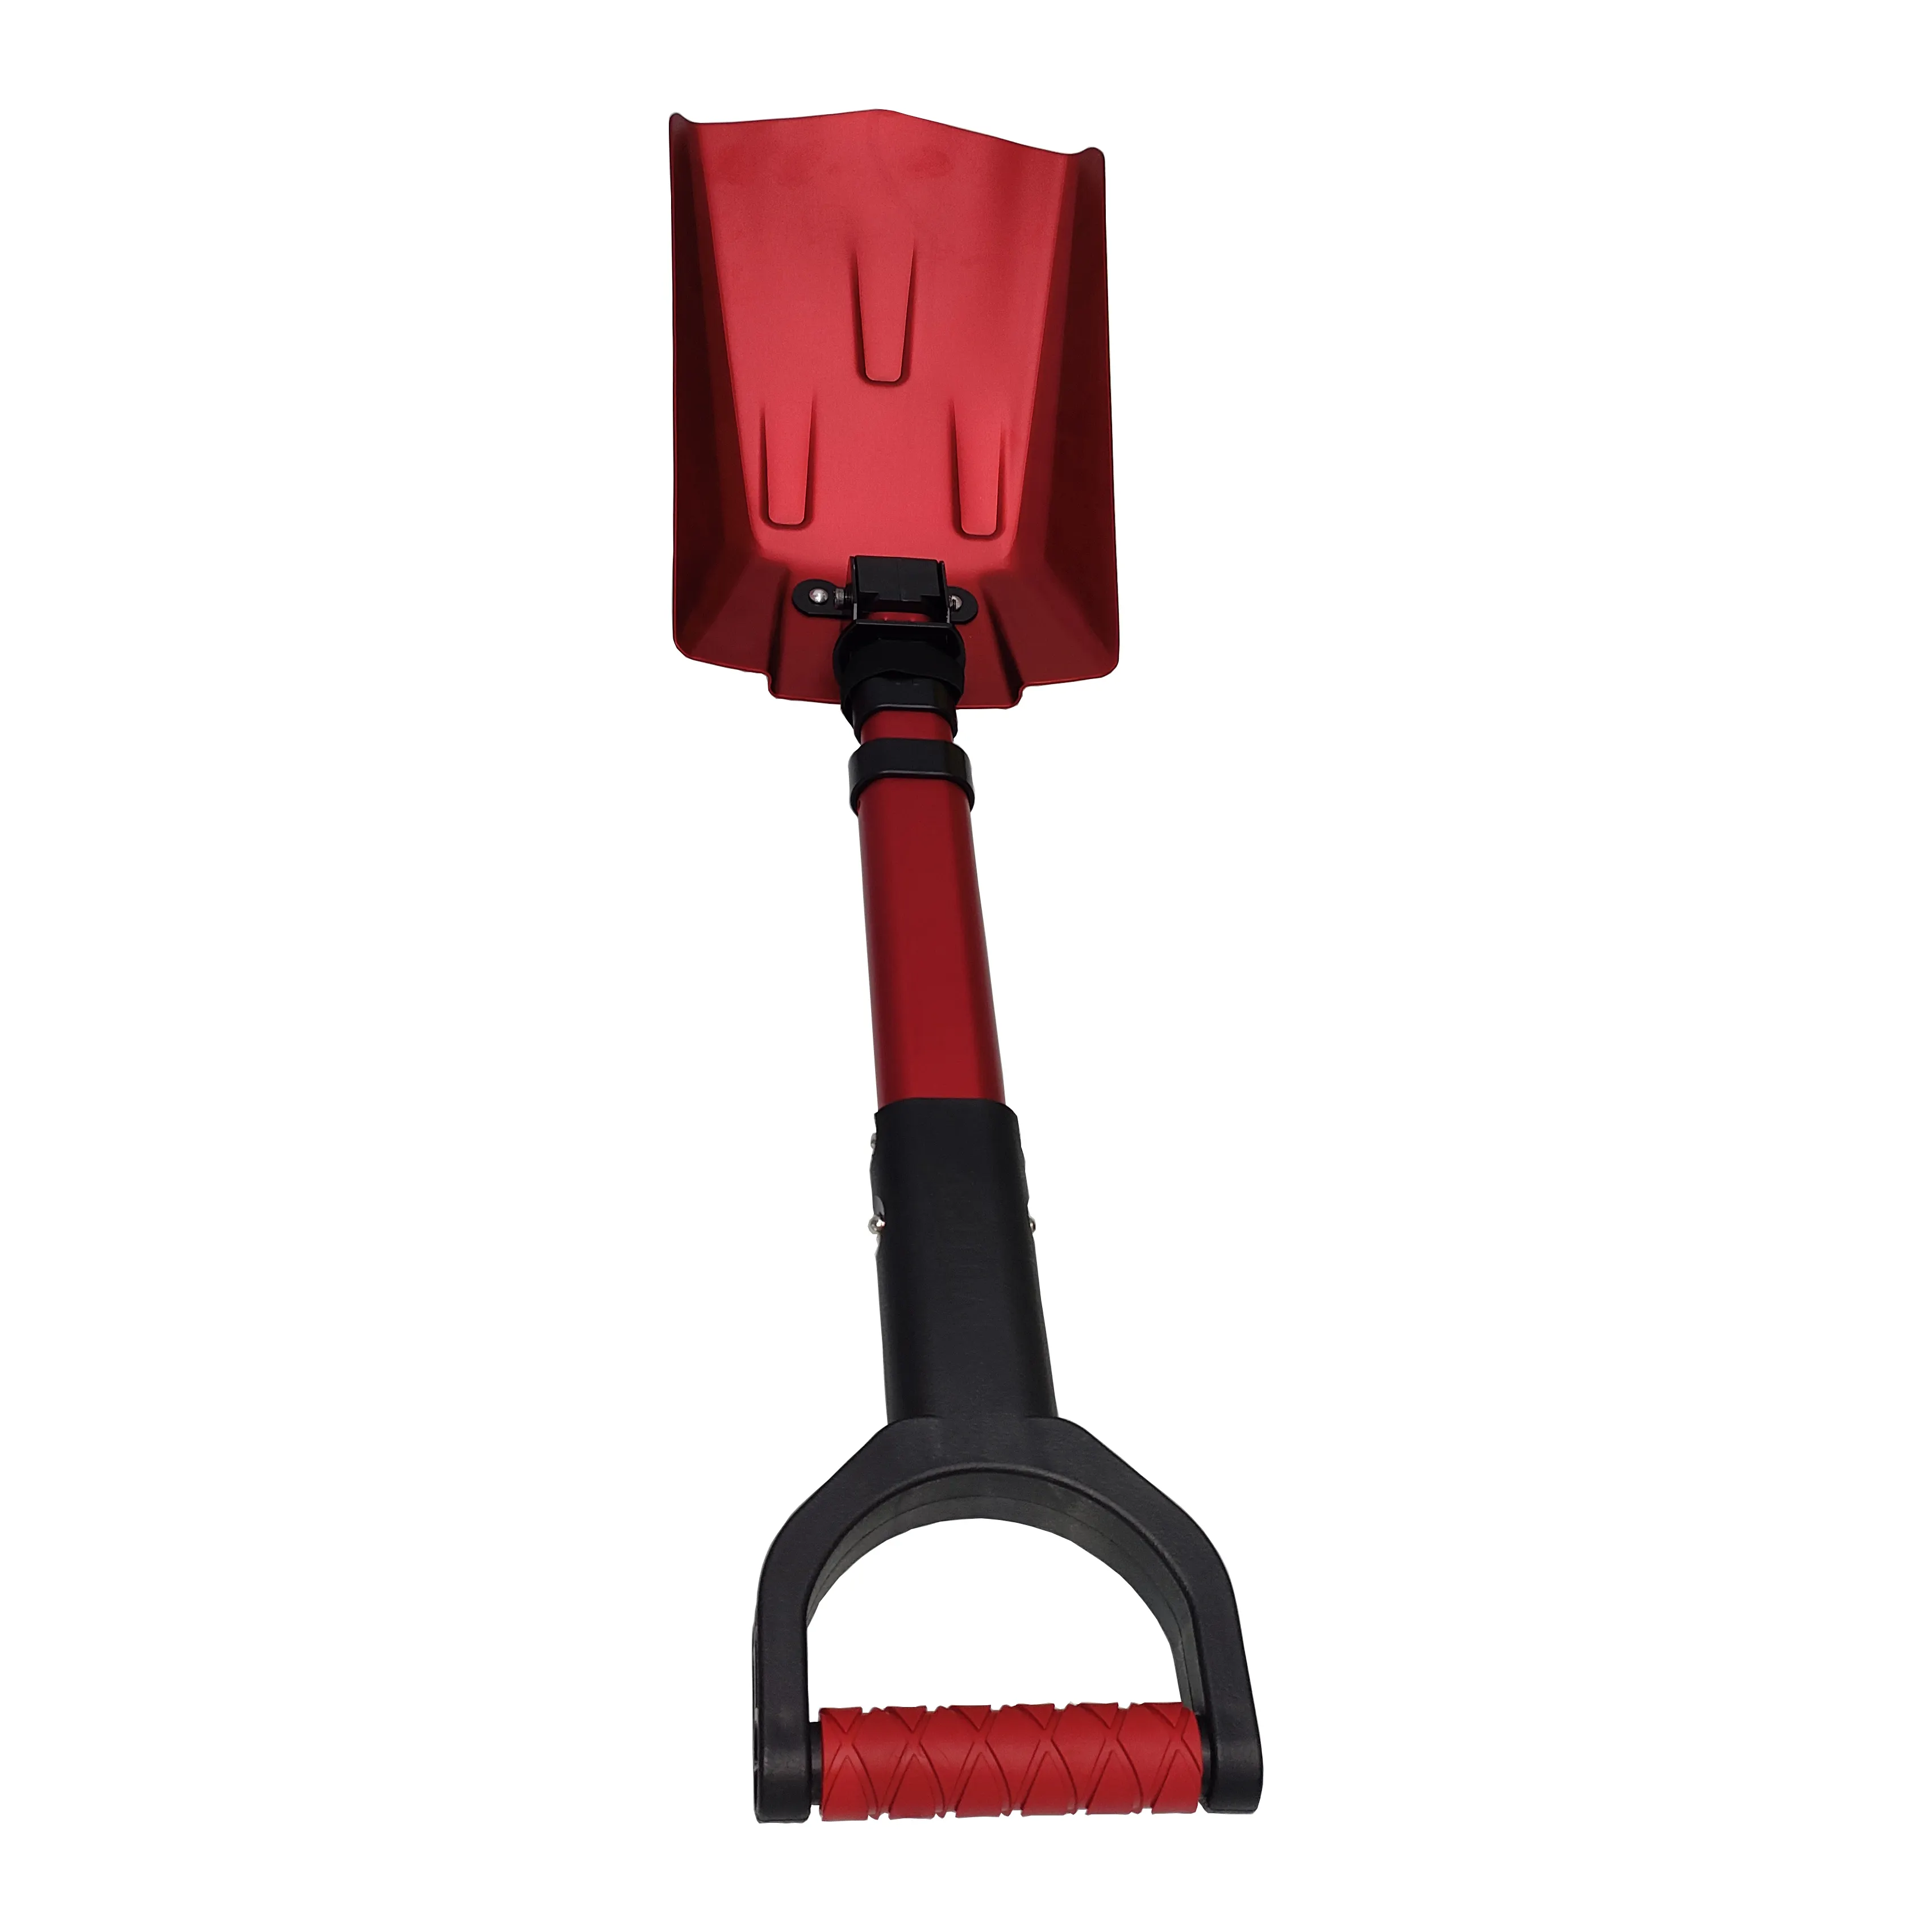 Folding Emergency Aluminum Shovel Lightweight Compact and Collapsible Snow Shovel